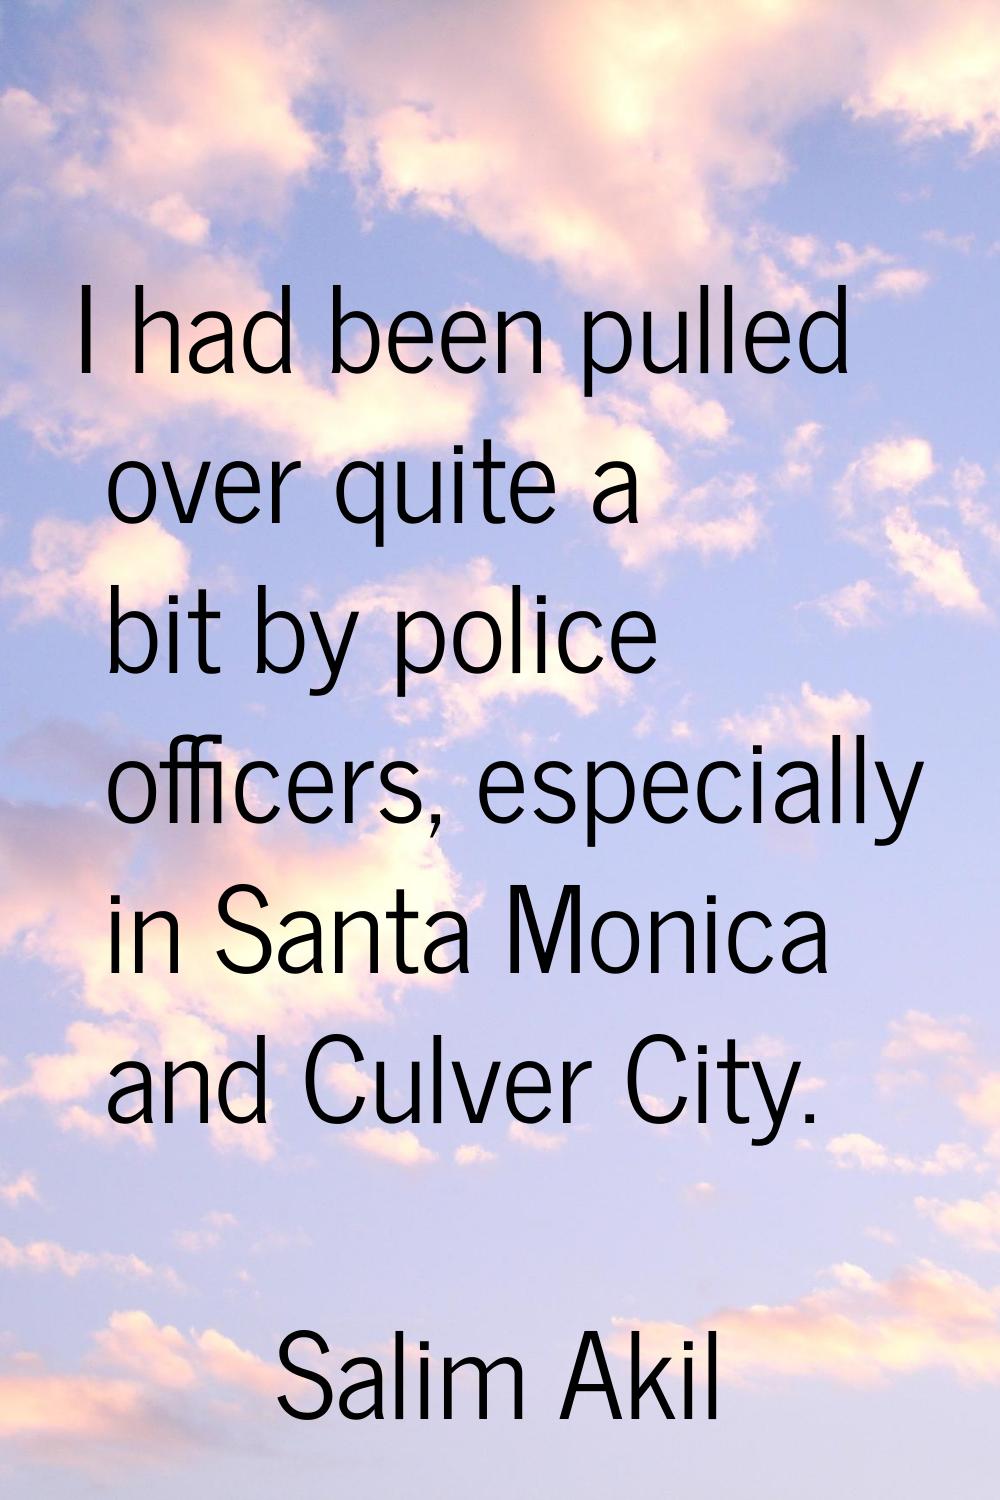 I had been pulled over quite a bit by police officers, especially in Santa Monica and Culver City.